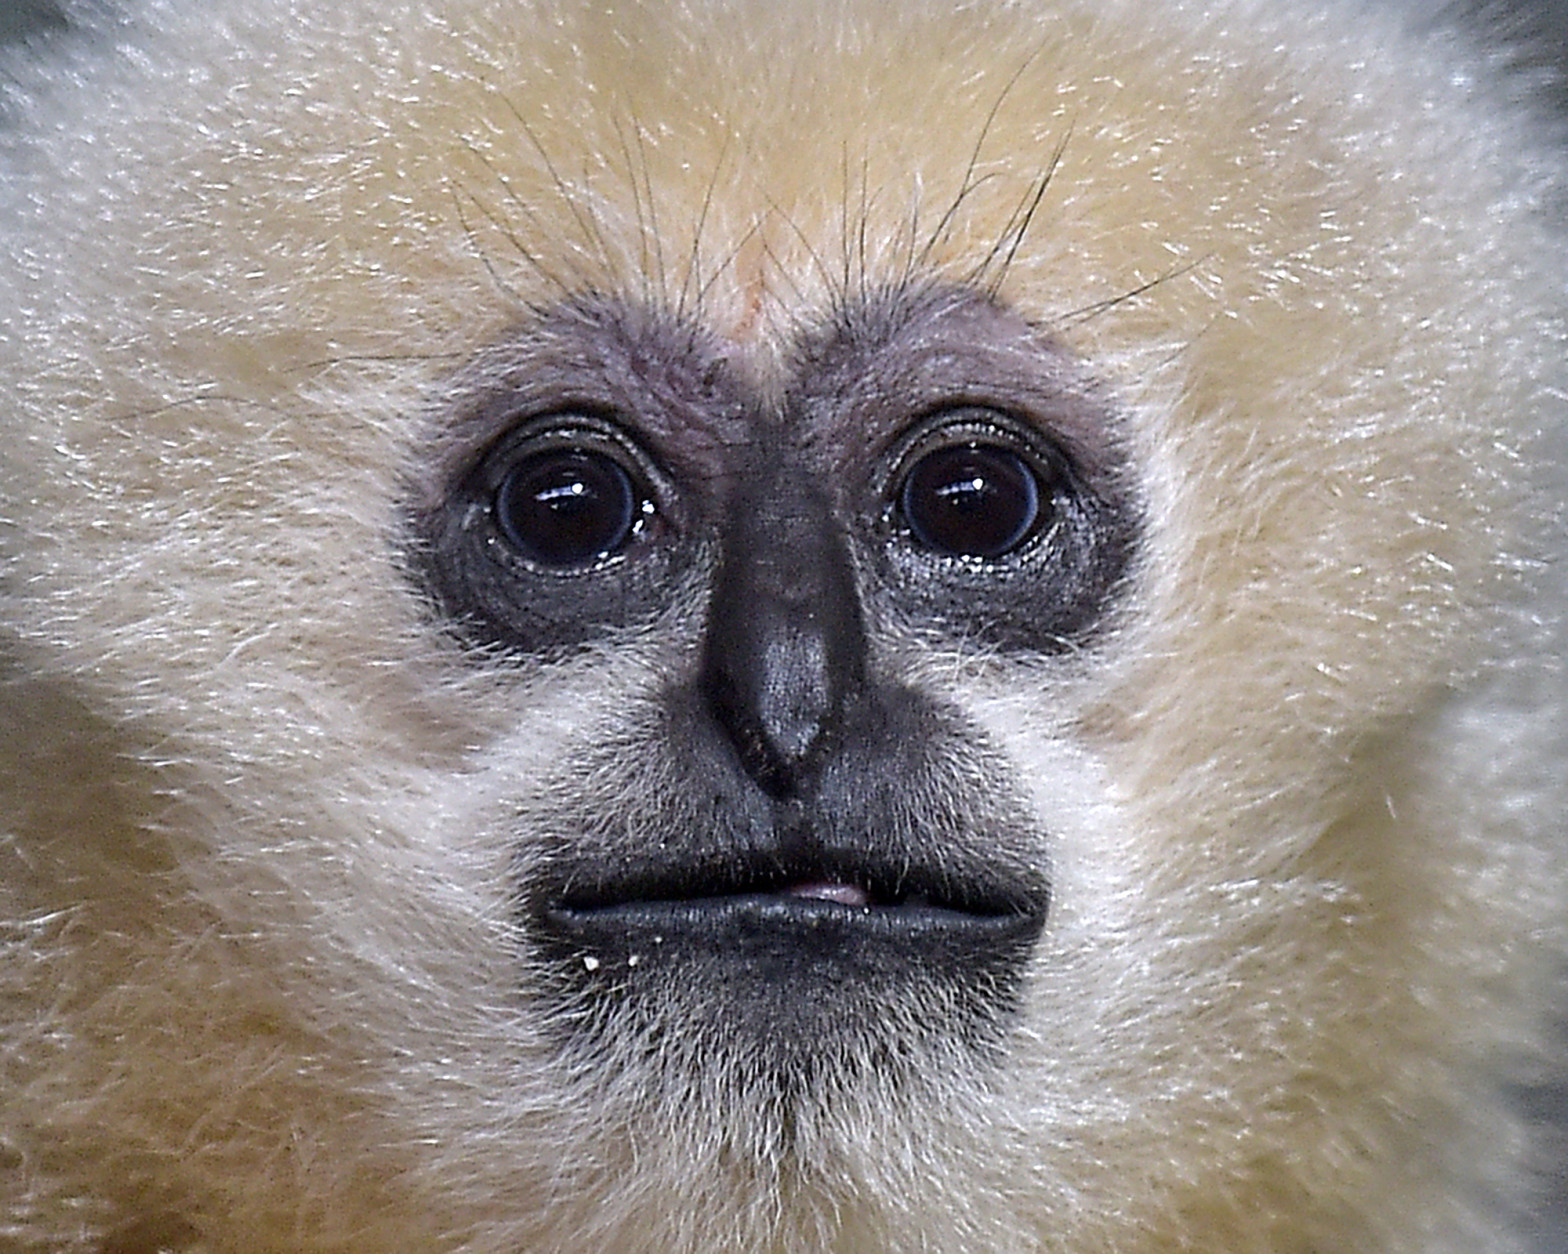 A white-cheeked gibbon watches the photographer at the zoo in Duisburg, Germany, Friday, Feb. 20, 2015. (AP Photo/Martin Meissner)